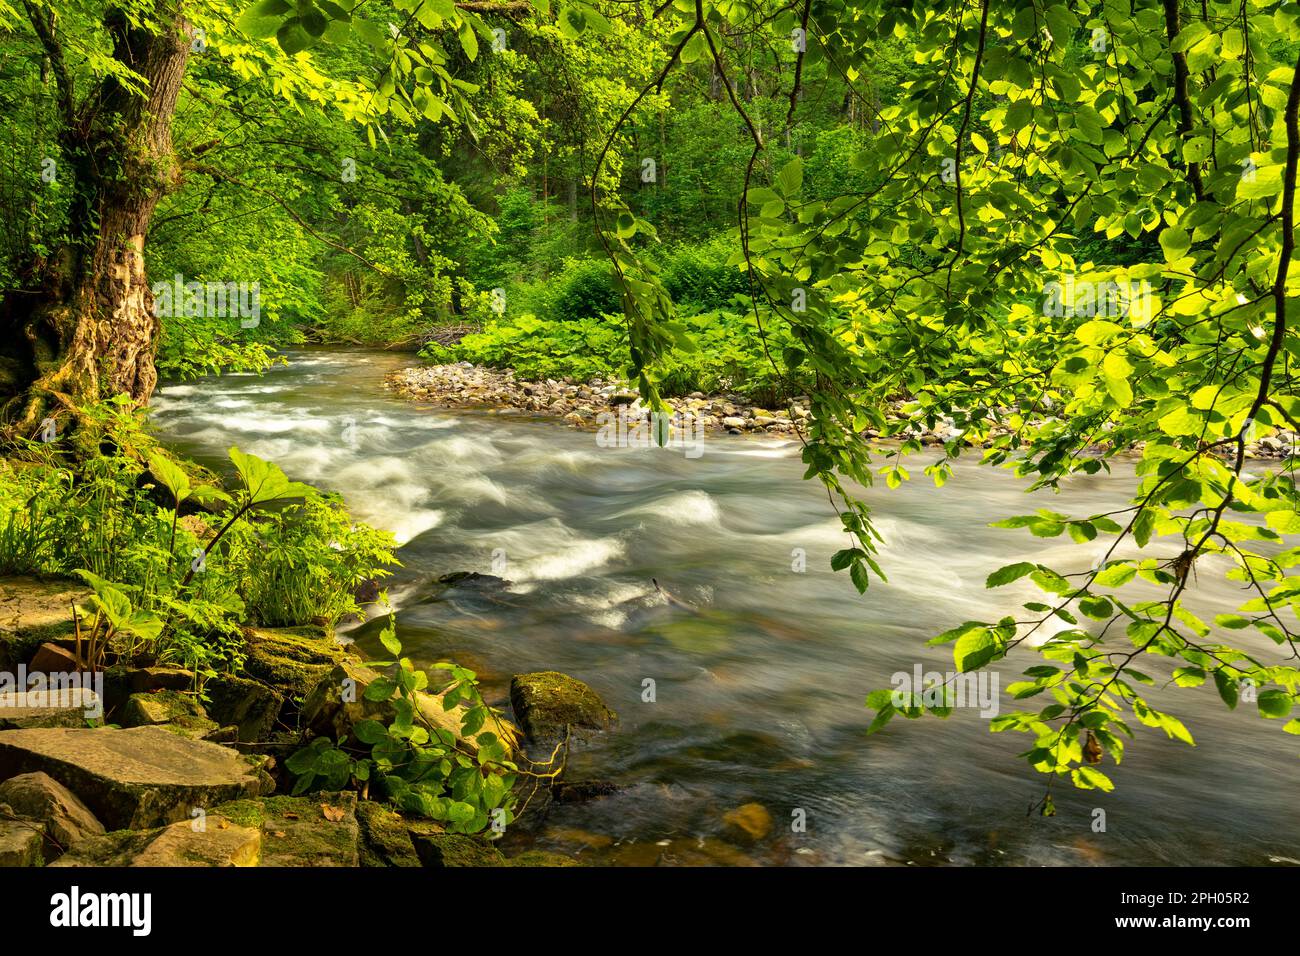 Landscape in the Black Forest, river Wutach in the Wutach canyon (Wutachschlucht). Germany Stock Photo